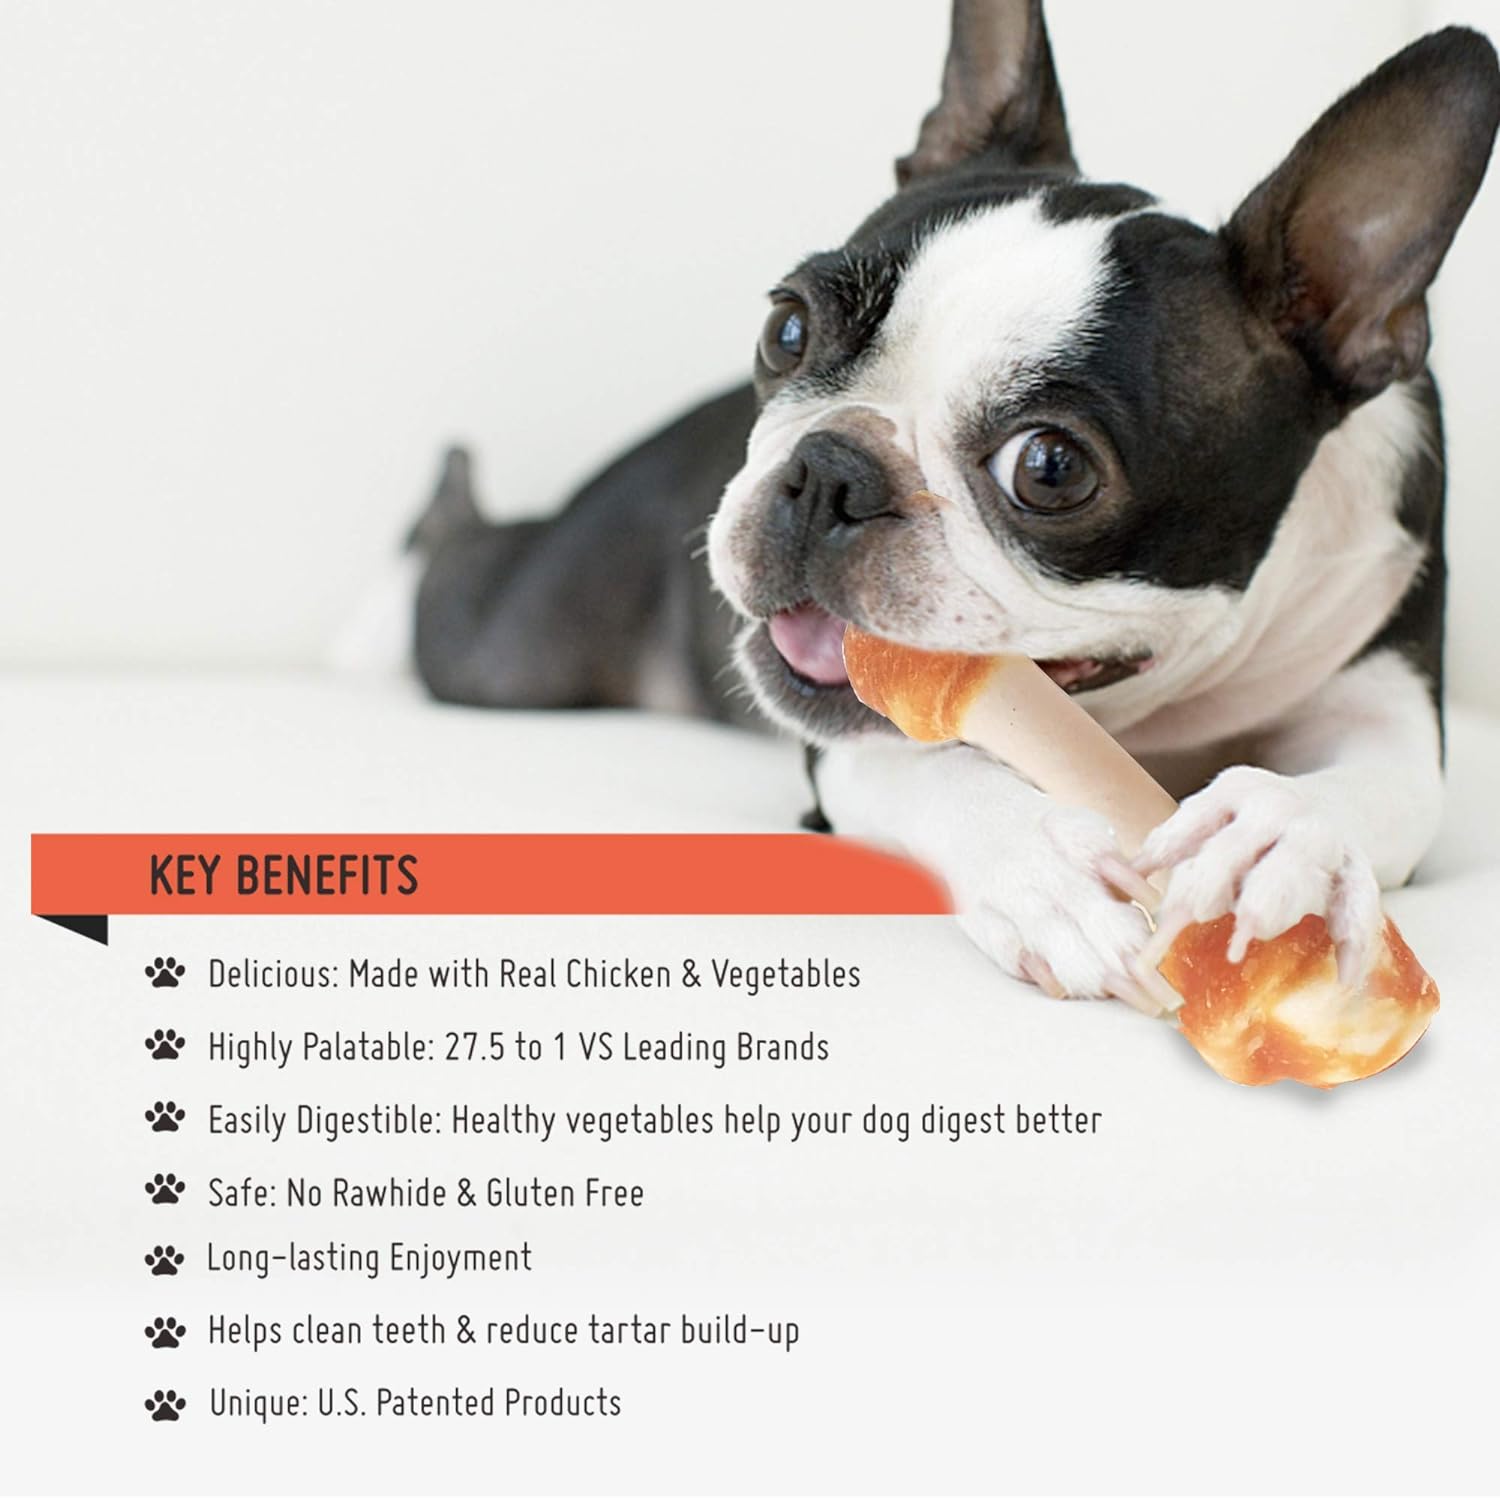 LuvChew Premium Dog Chew Bones for Small Dogs, Rawhide Free, Grain Free, Made with Limited Ingredients, Delicious Mini 18pcs/Pack x 2packs : Pet Supplies